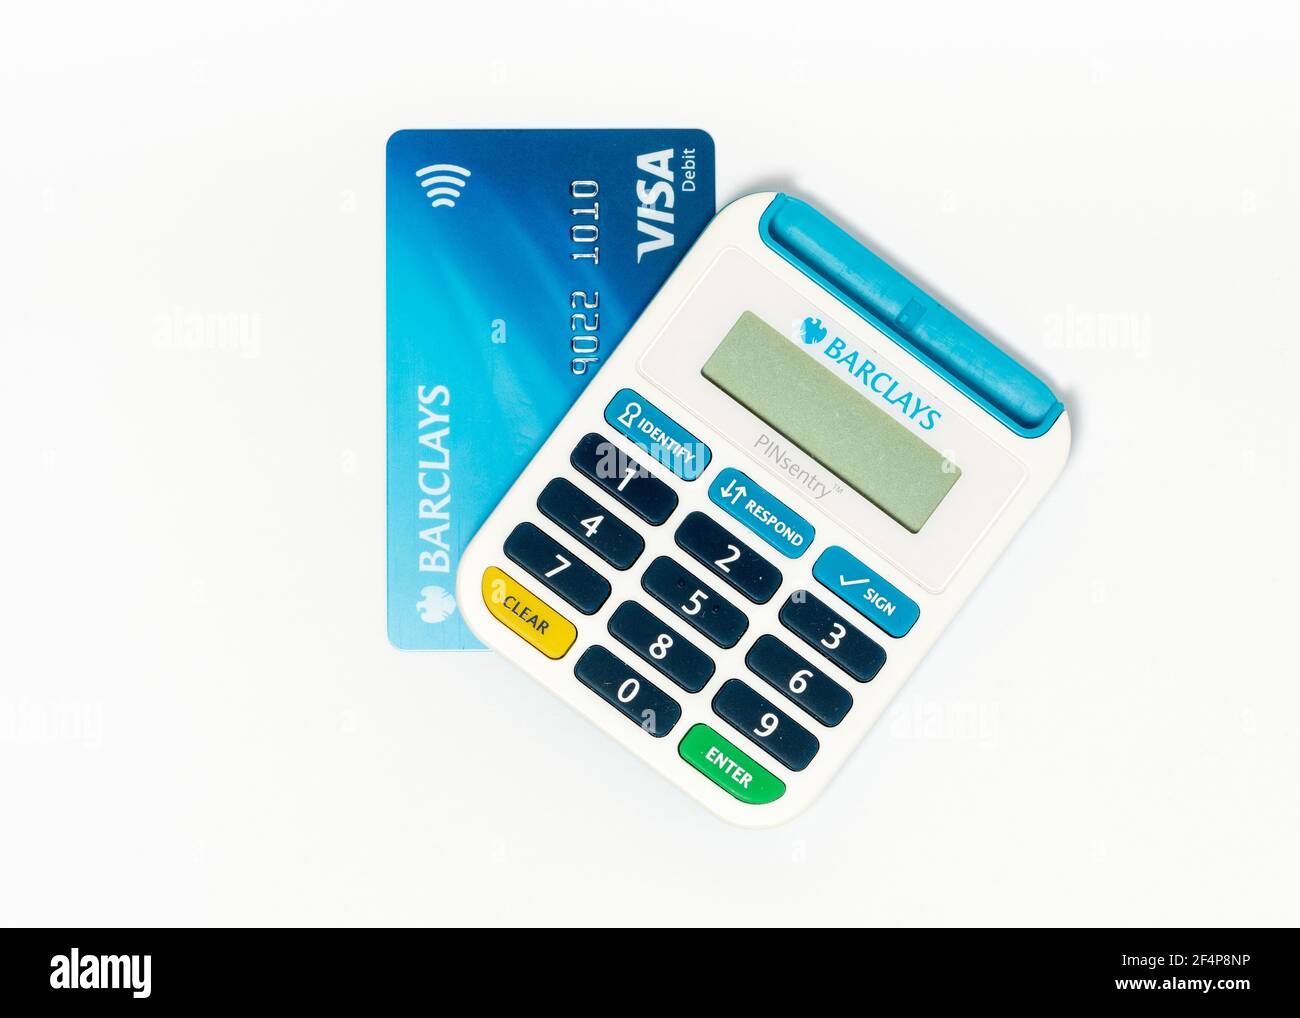 Barclays Pinsentry card reader device and a Visa Debit card on white Stock Photo